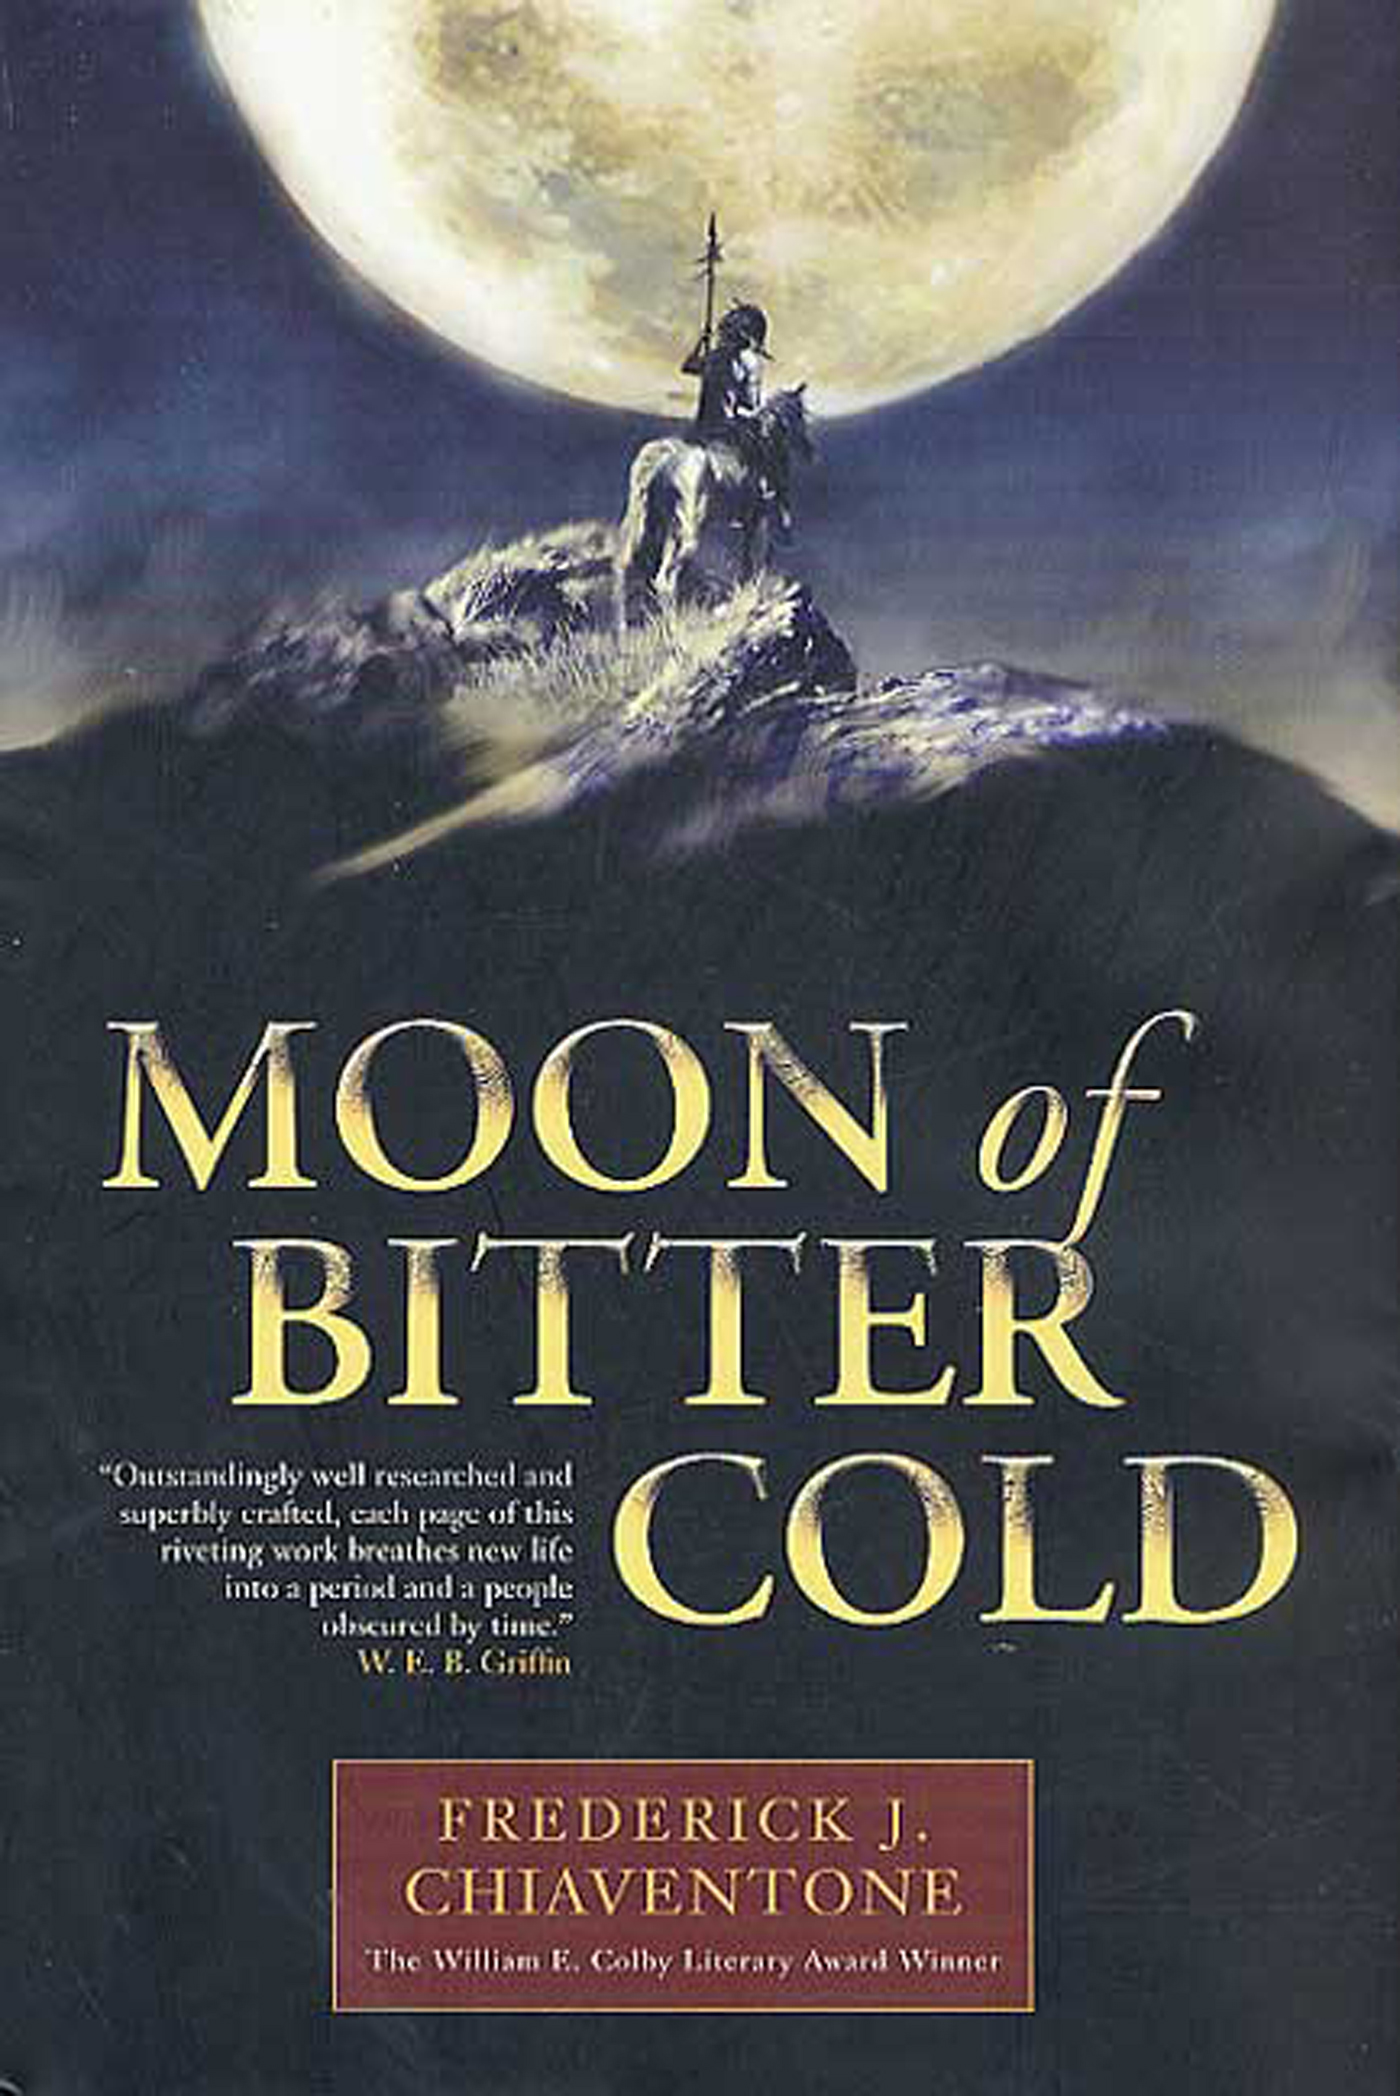 Moon of Bitter Cold by Frederick J. Chiaventone